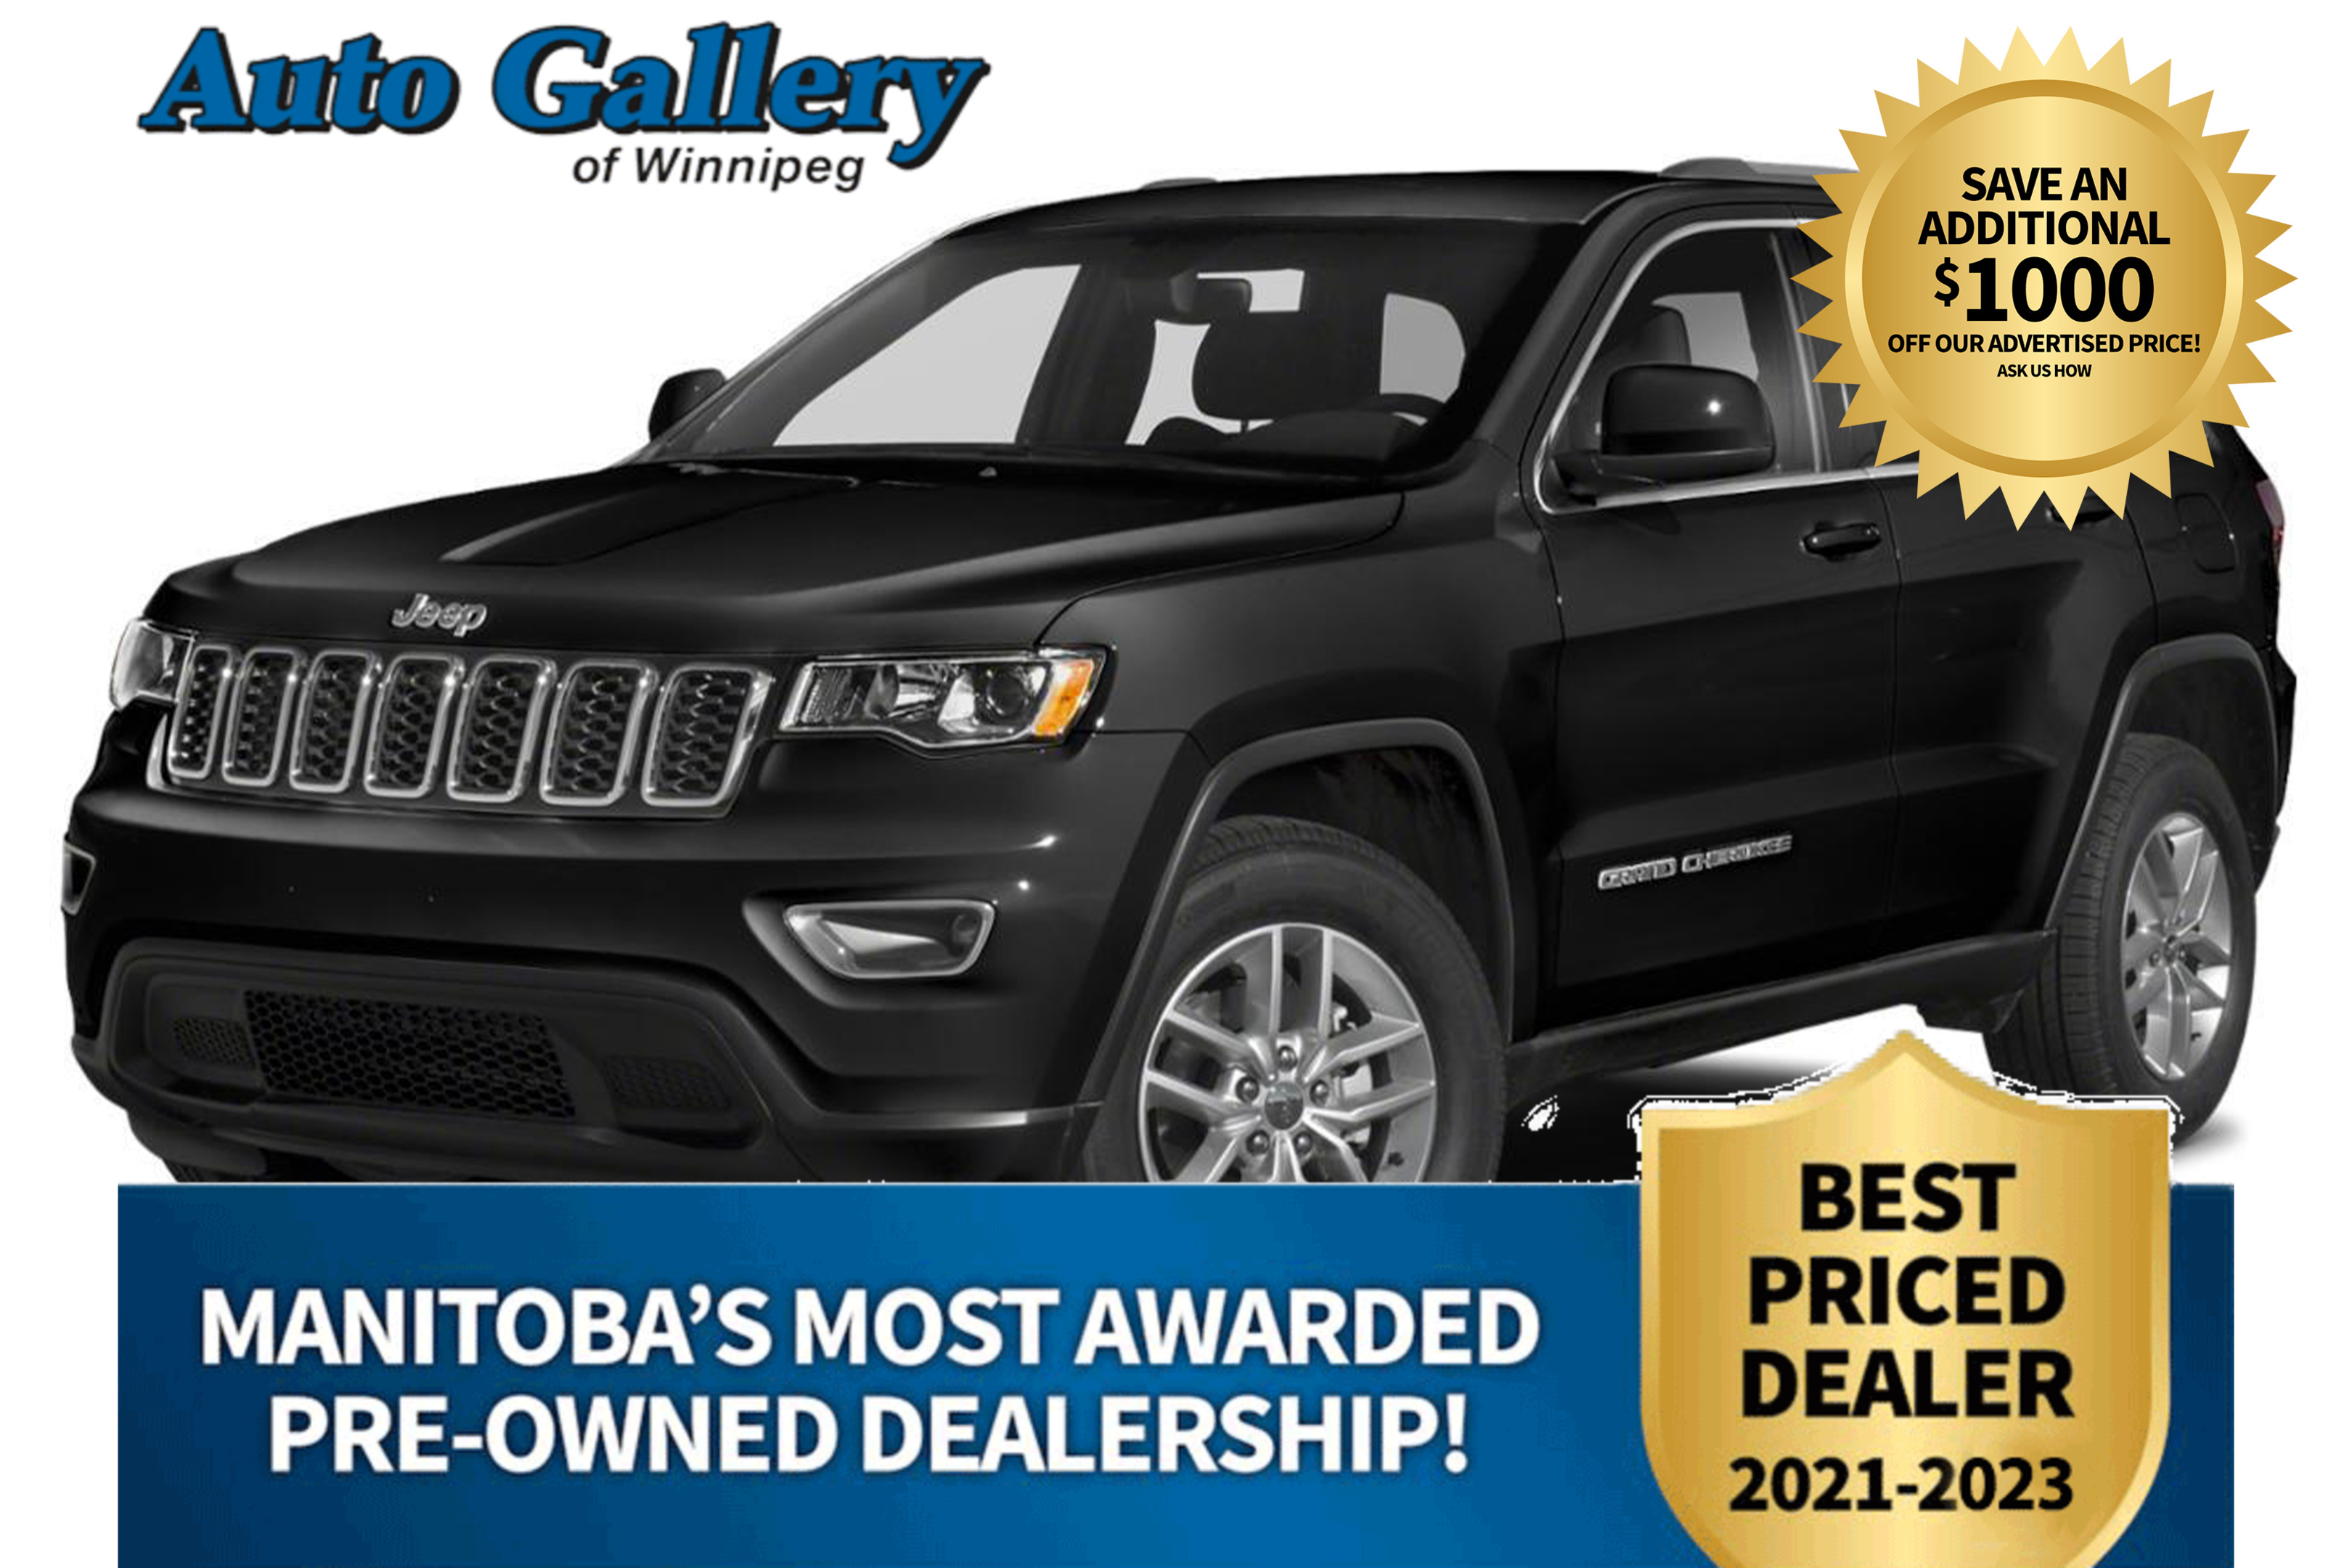 2021 Jeep Grand Cherokee ALTITUDE 4x4, ROOF, ALPINE, REMOTE, CLEAN CARFAX